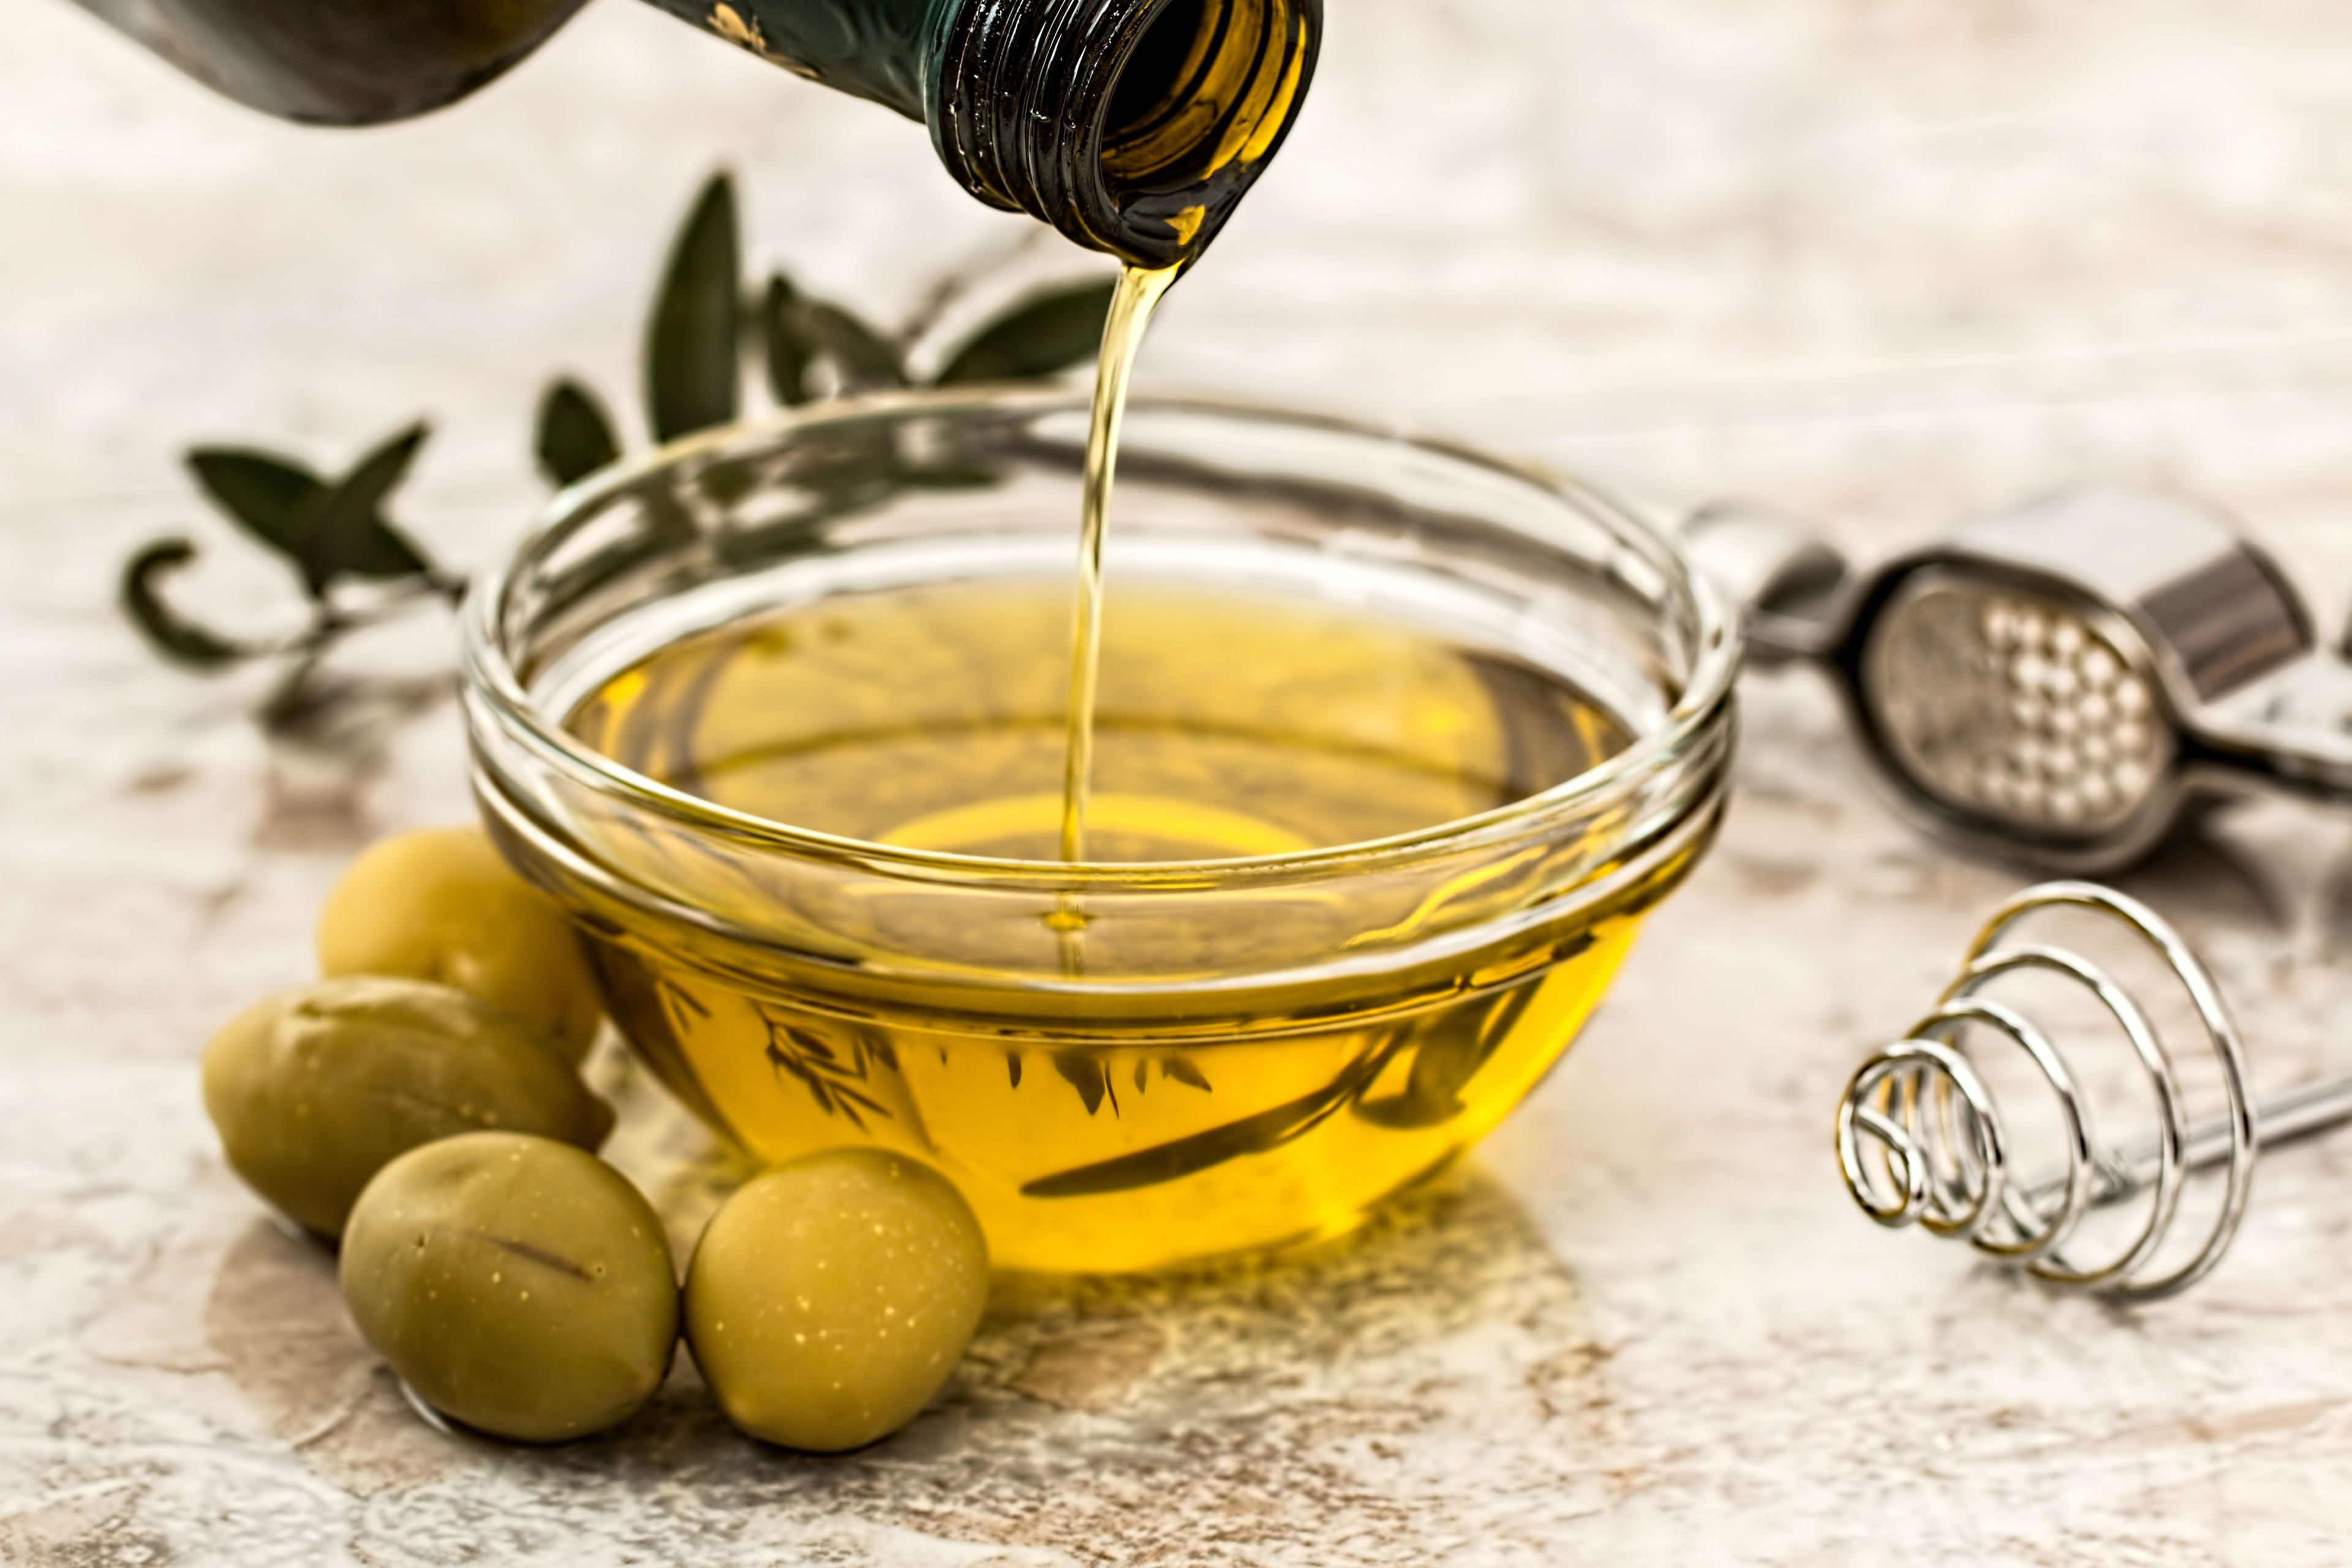 What Makes an Oil Healthy?